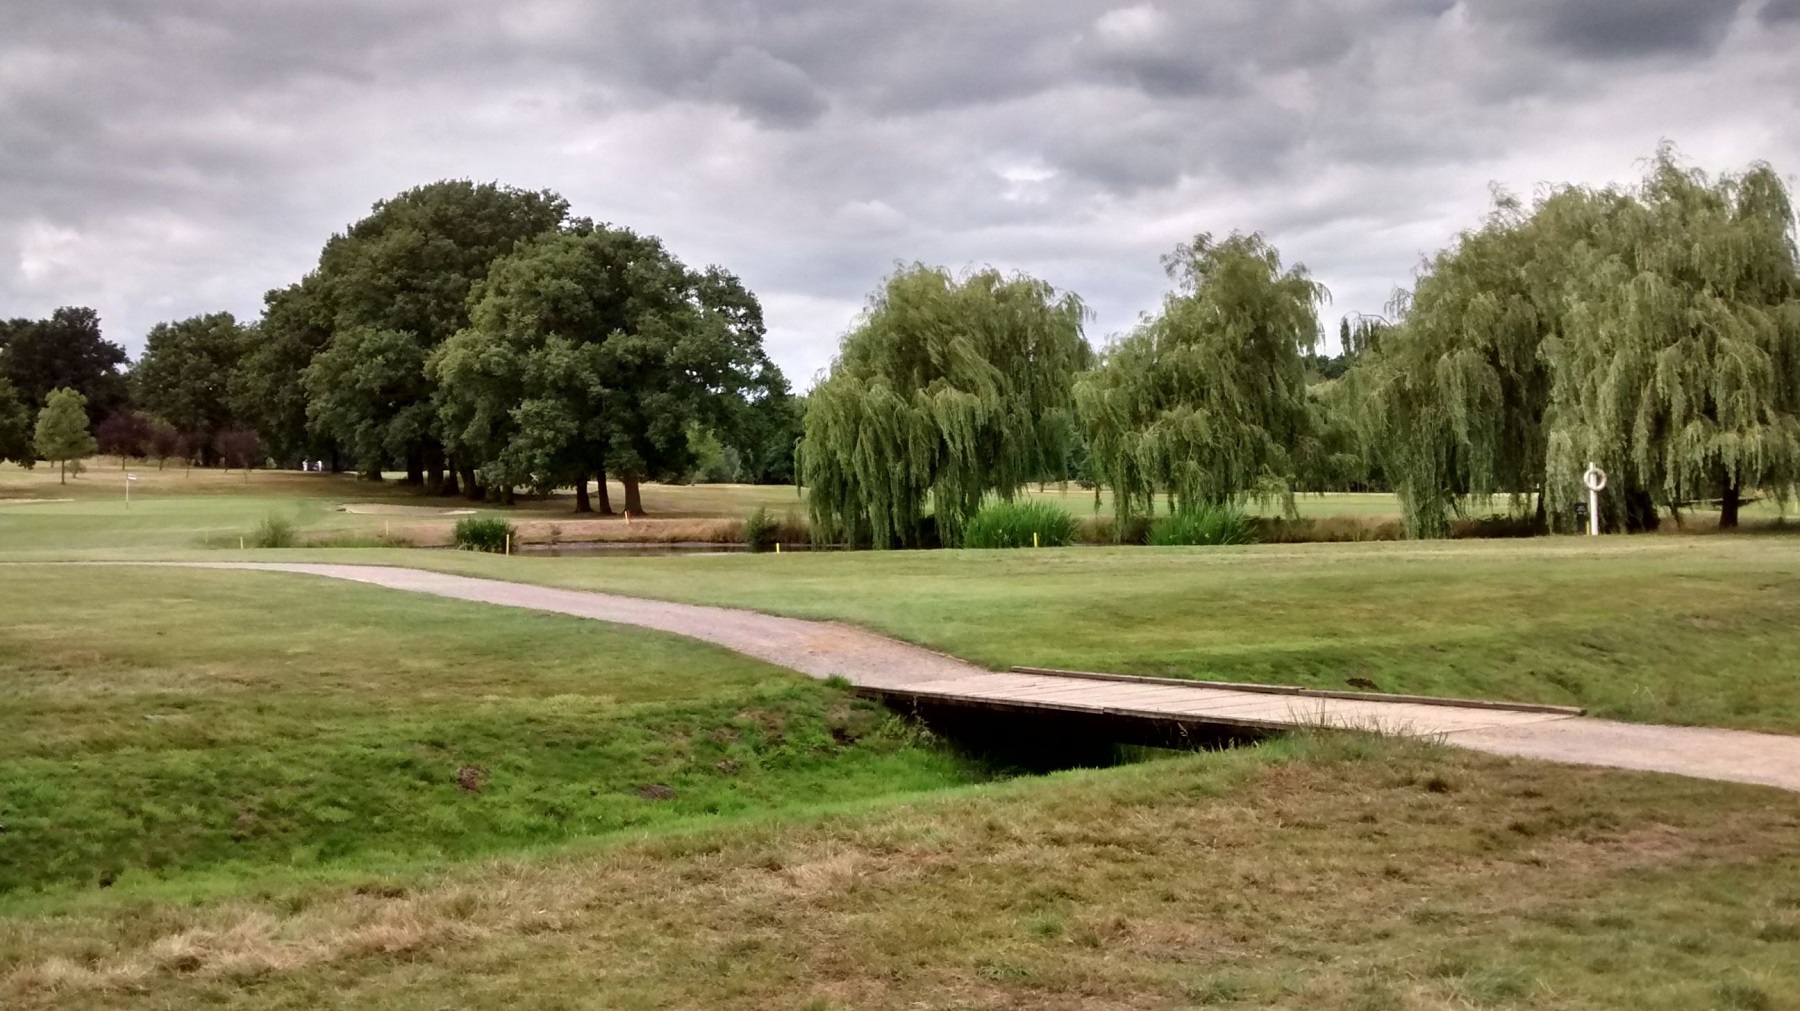 Willows and other trees on the edge of a golf course on a cloudy summer afternoon. Closely cropped grass is present in the foreground, dissected by a path which crosses a small footbridge.